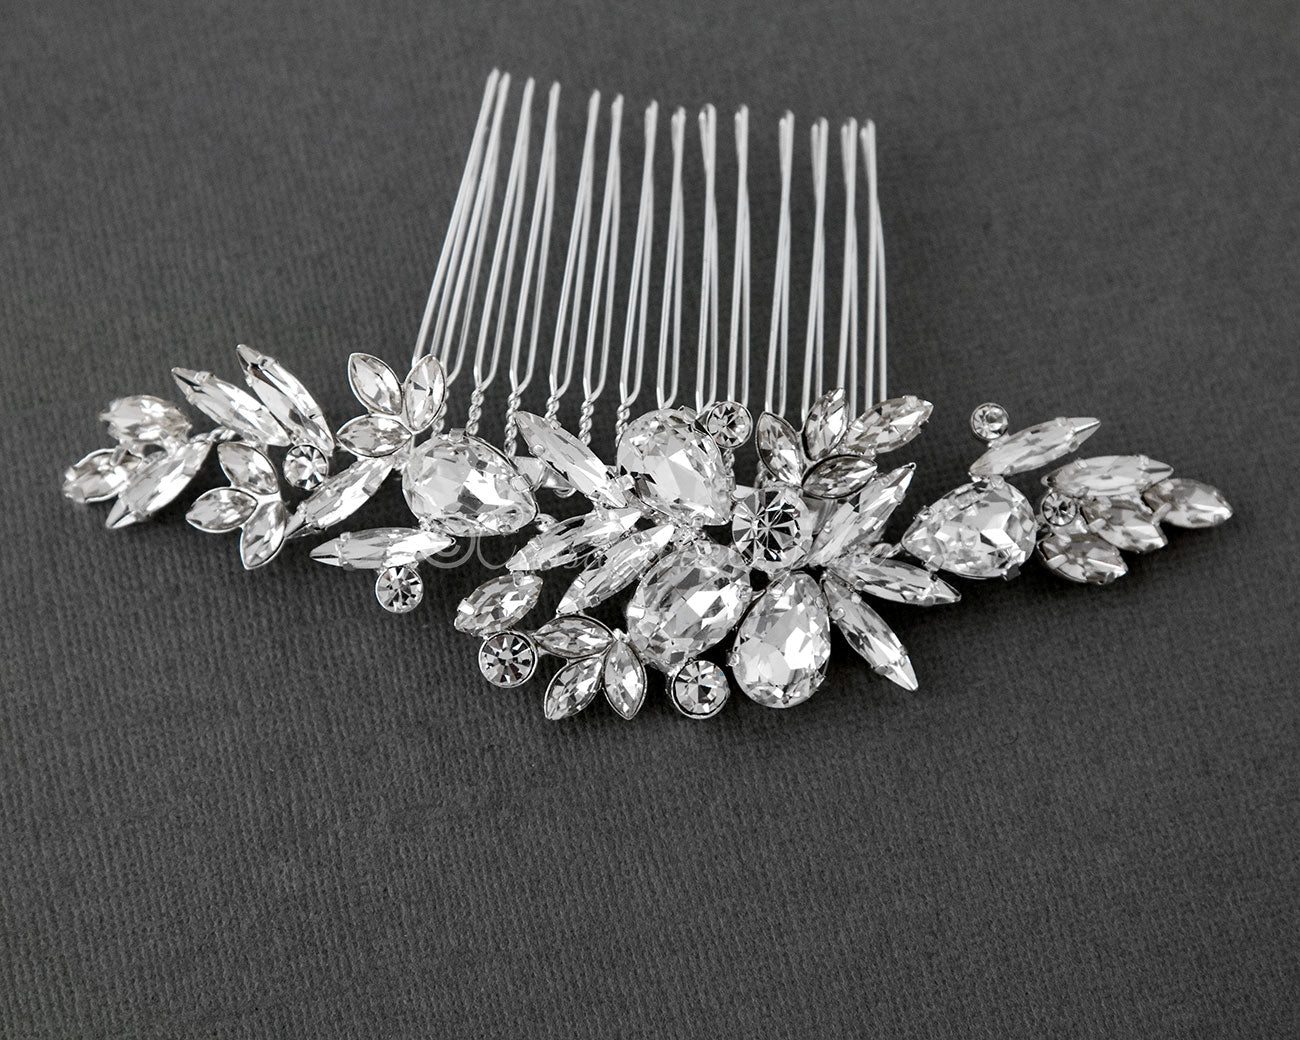 Bridal Comb of Pear and Marquise Stones - Cassandra Lynne